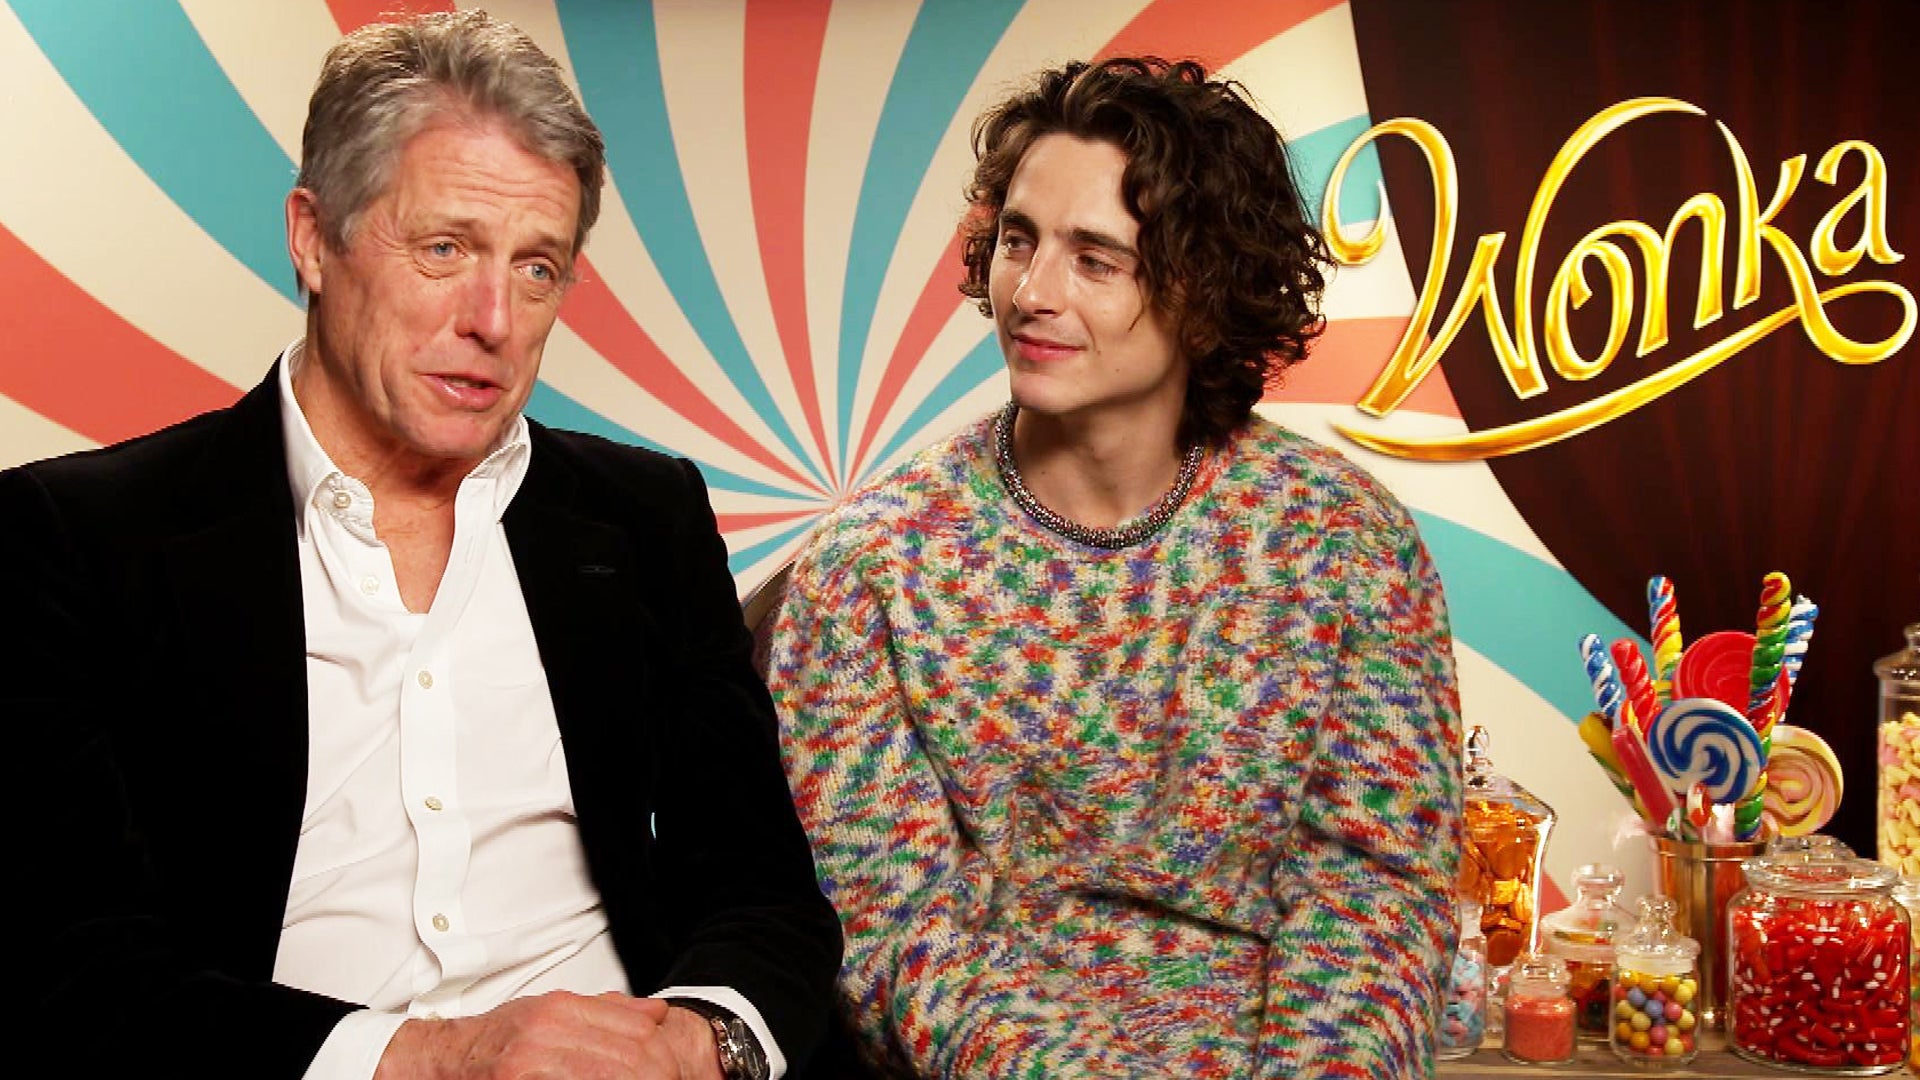 Why Hugh Grant Felt ‘Anxious’ About Working With Timothee Chalamet on 'Wonka' (Exclusive)